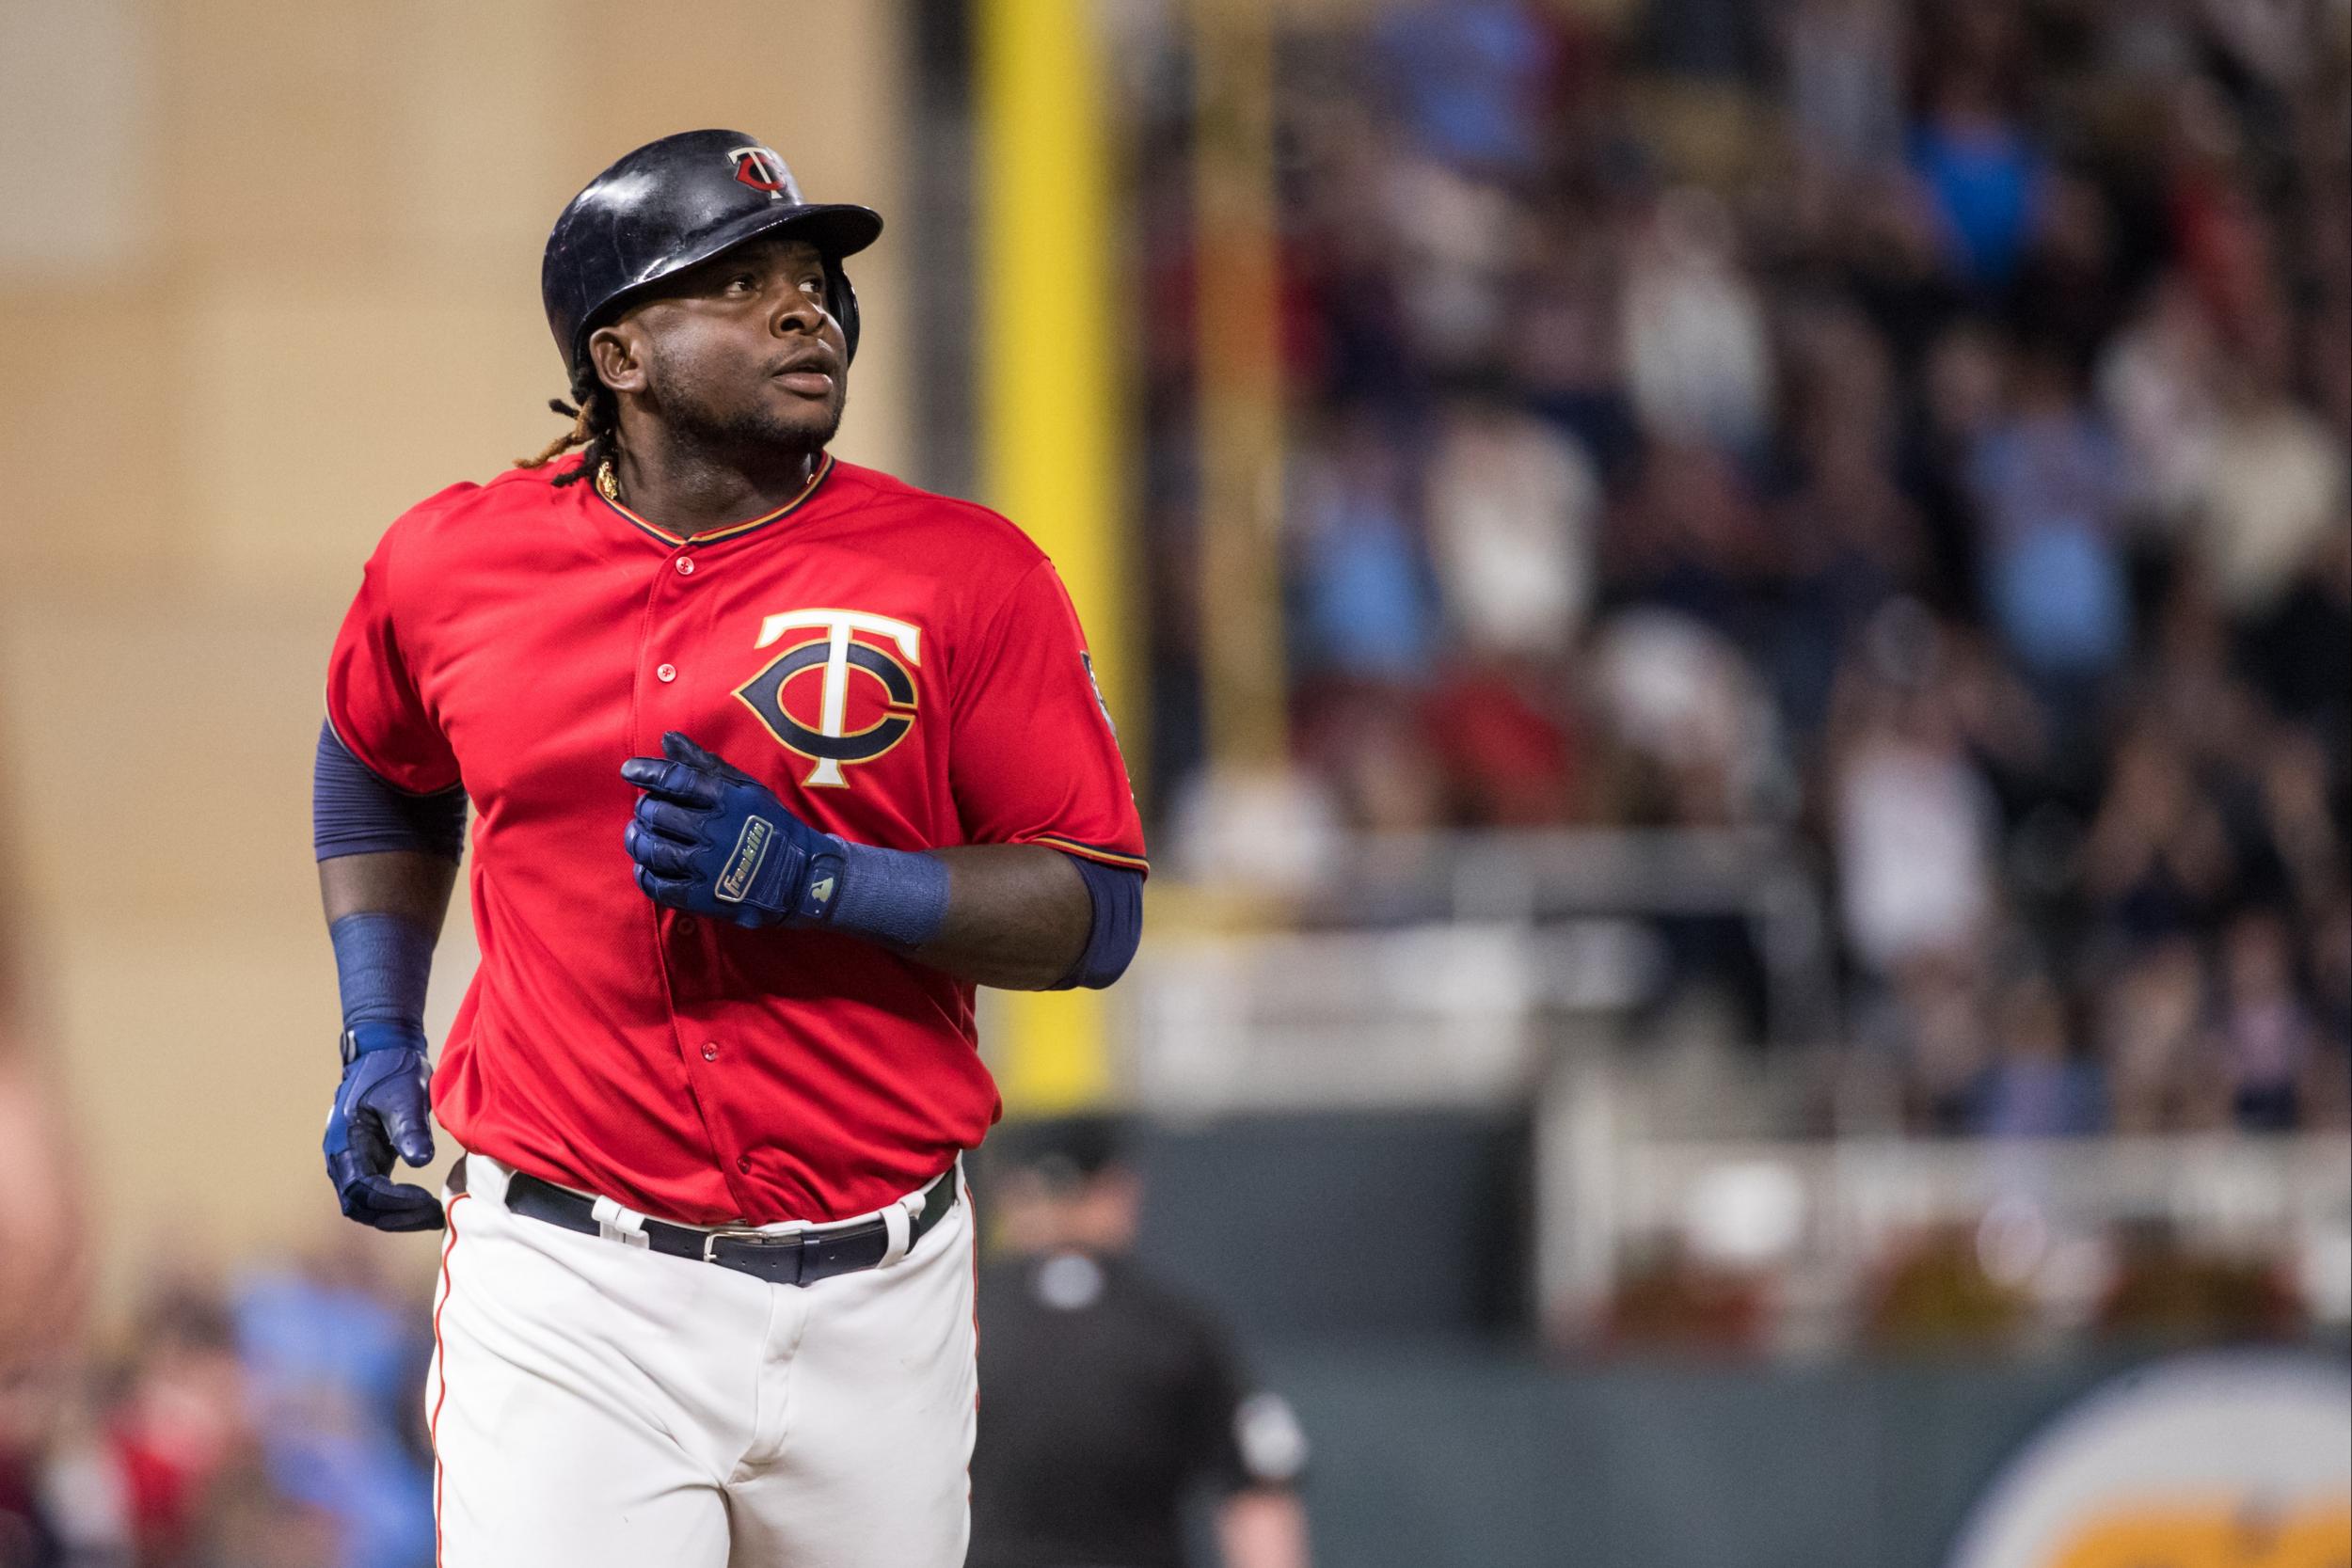 Miguel Sano has been accused of assault by a photographer